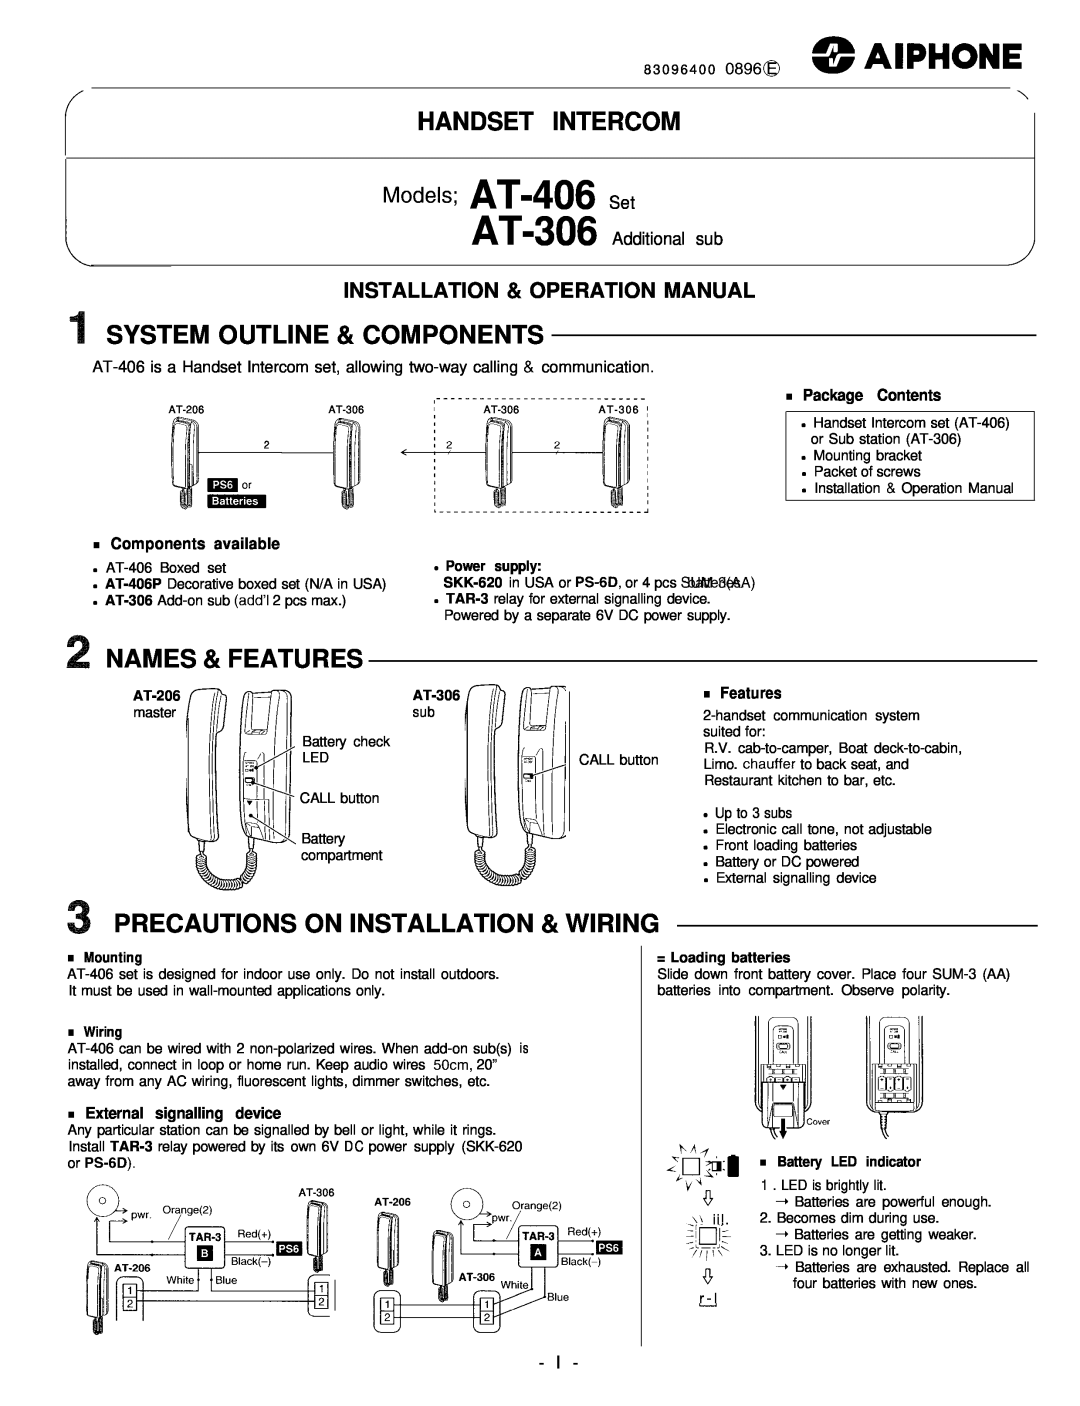 Aiphone operation manual $$$j~, yodels AT-406 AT-306, Handset Intercom, System Outline & Components, Names & Features 